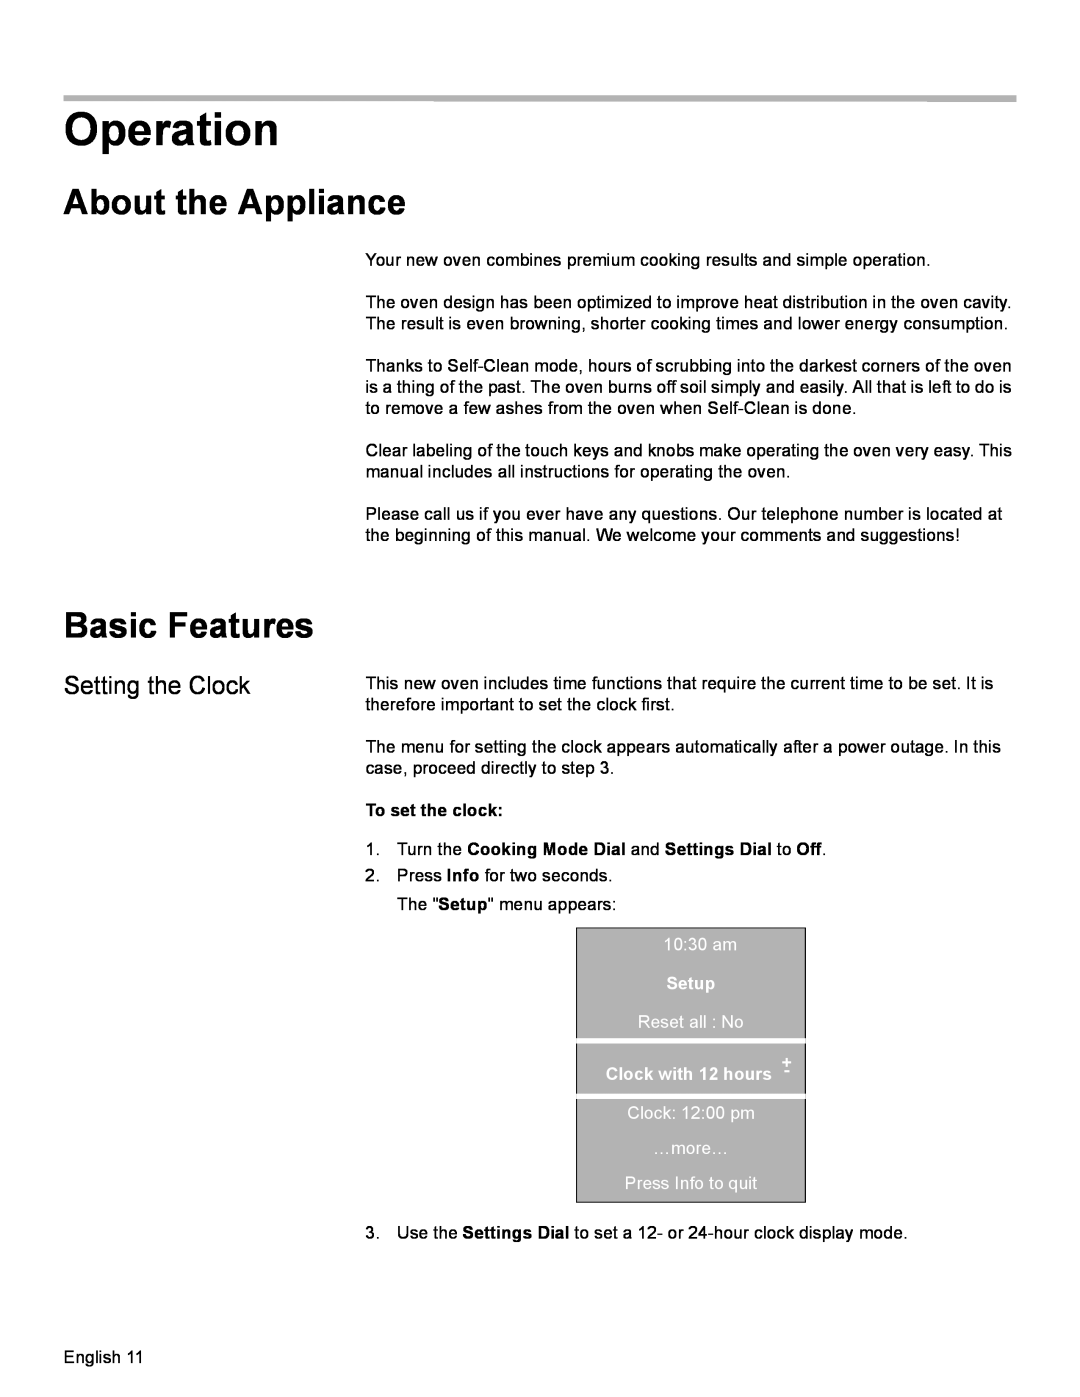 Bosch Appliances HBN54, HBL57, HBL56, HBL54, HBN56 manual Operation, About the Appliance, Basic Features, To set the clock 